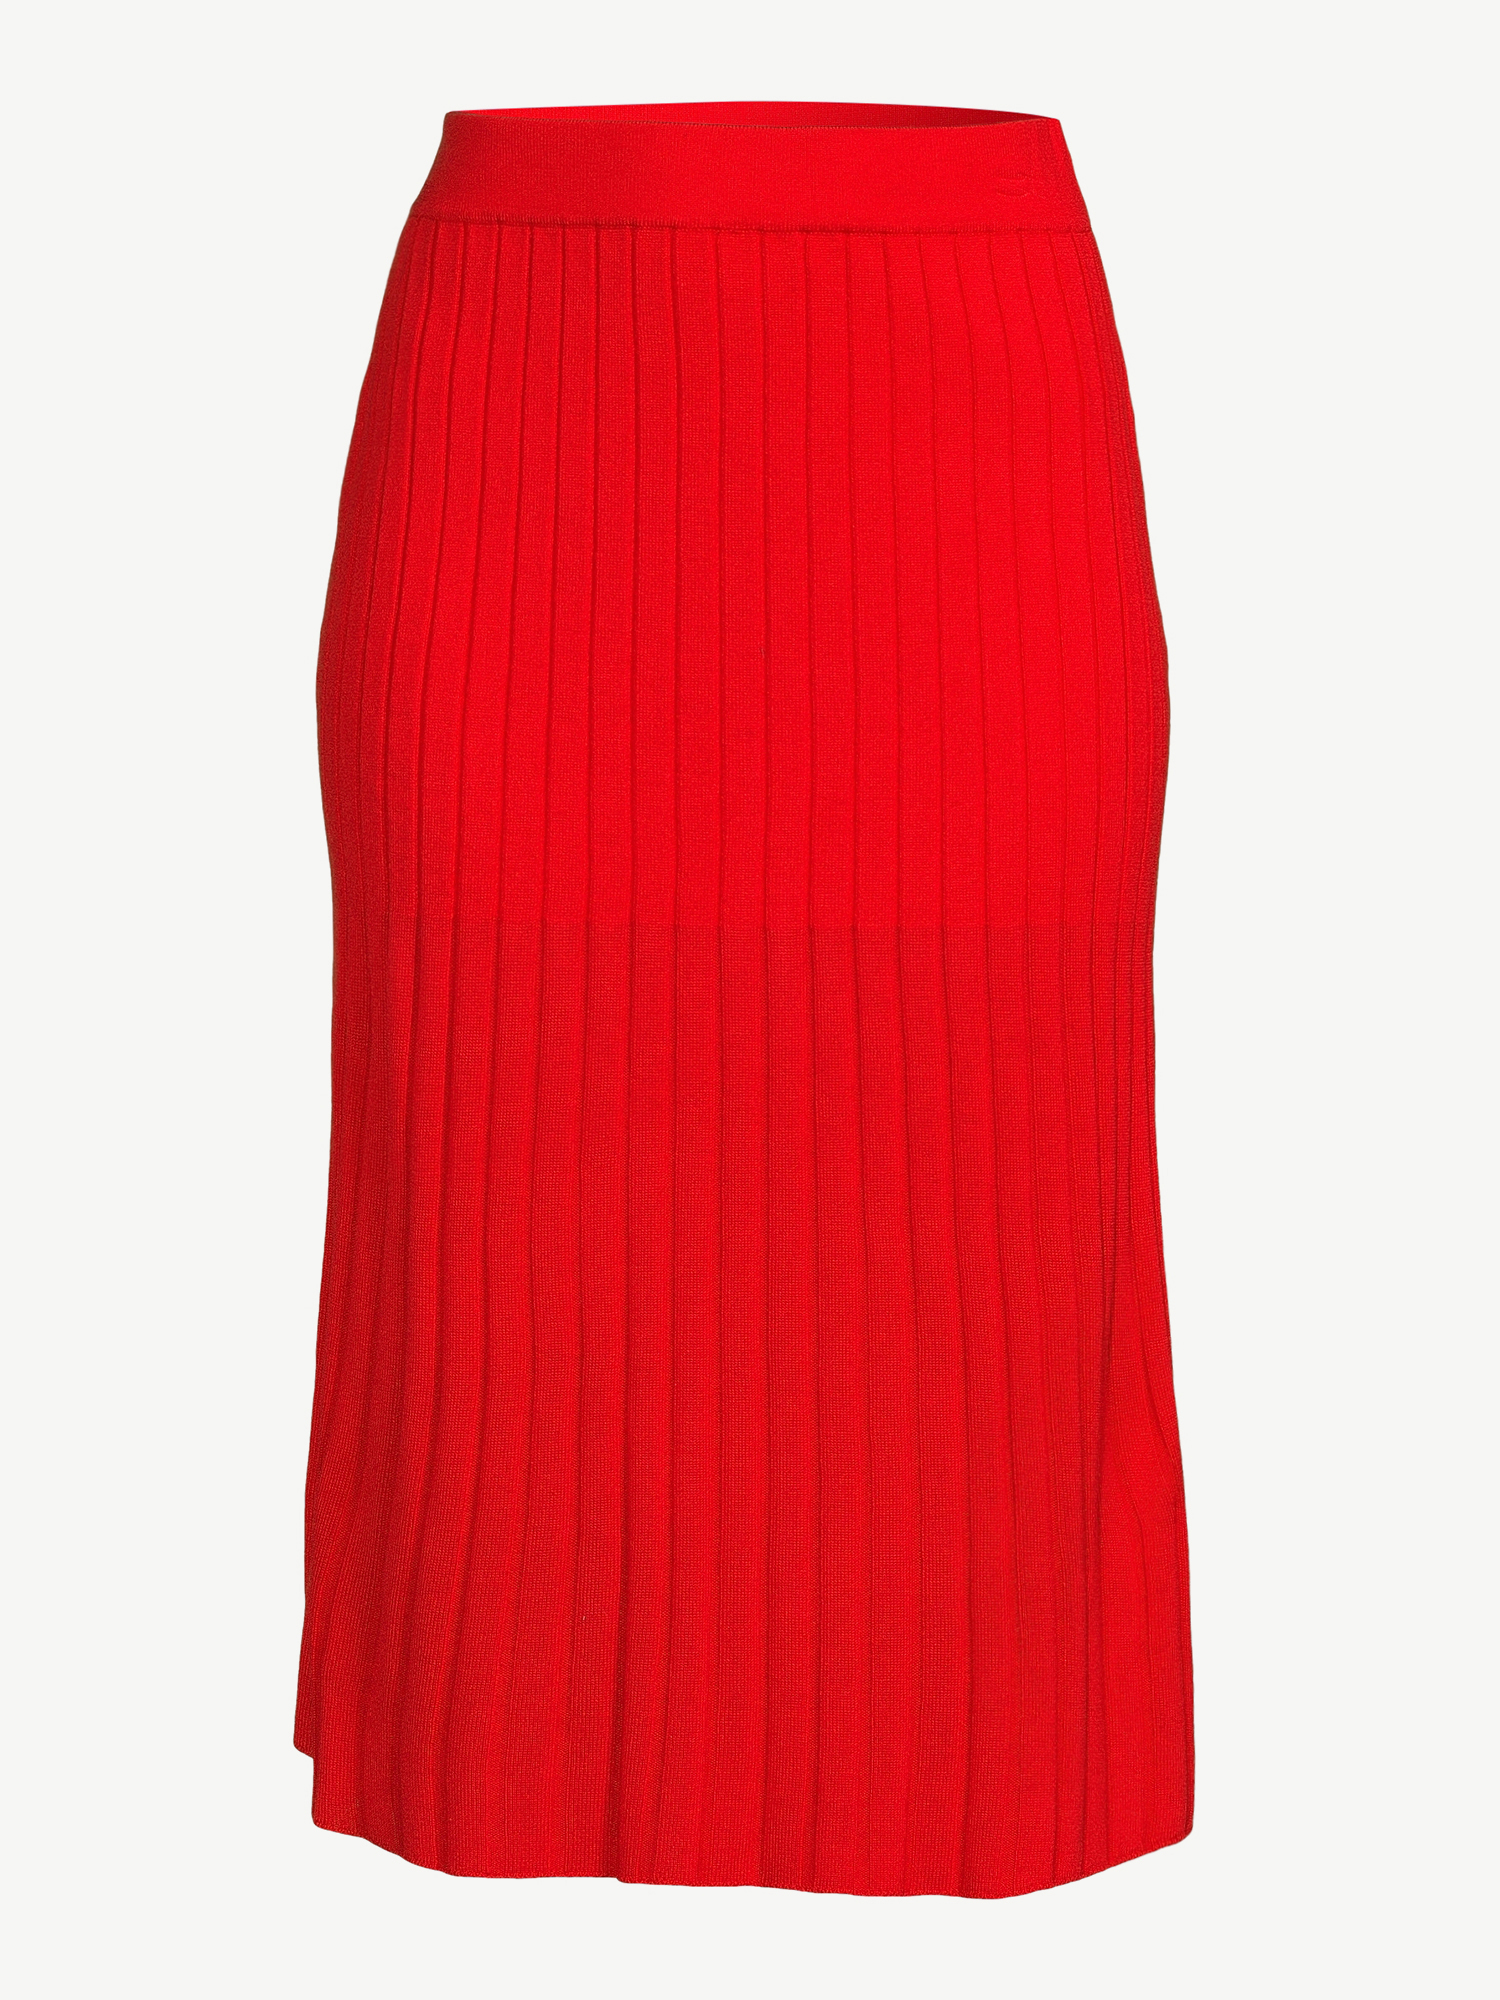 Free Assembly Women's Pleated Midi Sweater Skirt - image 2 of 6